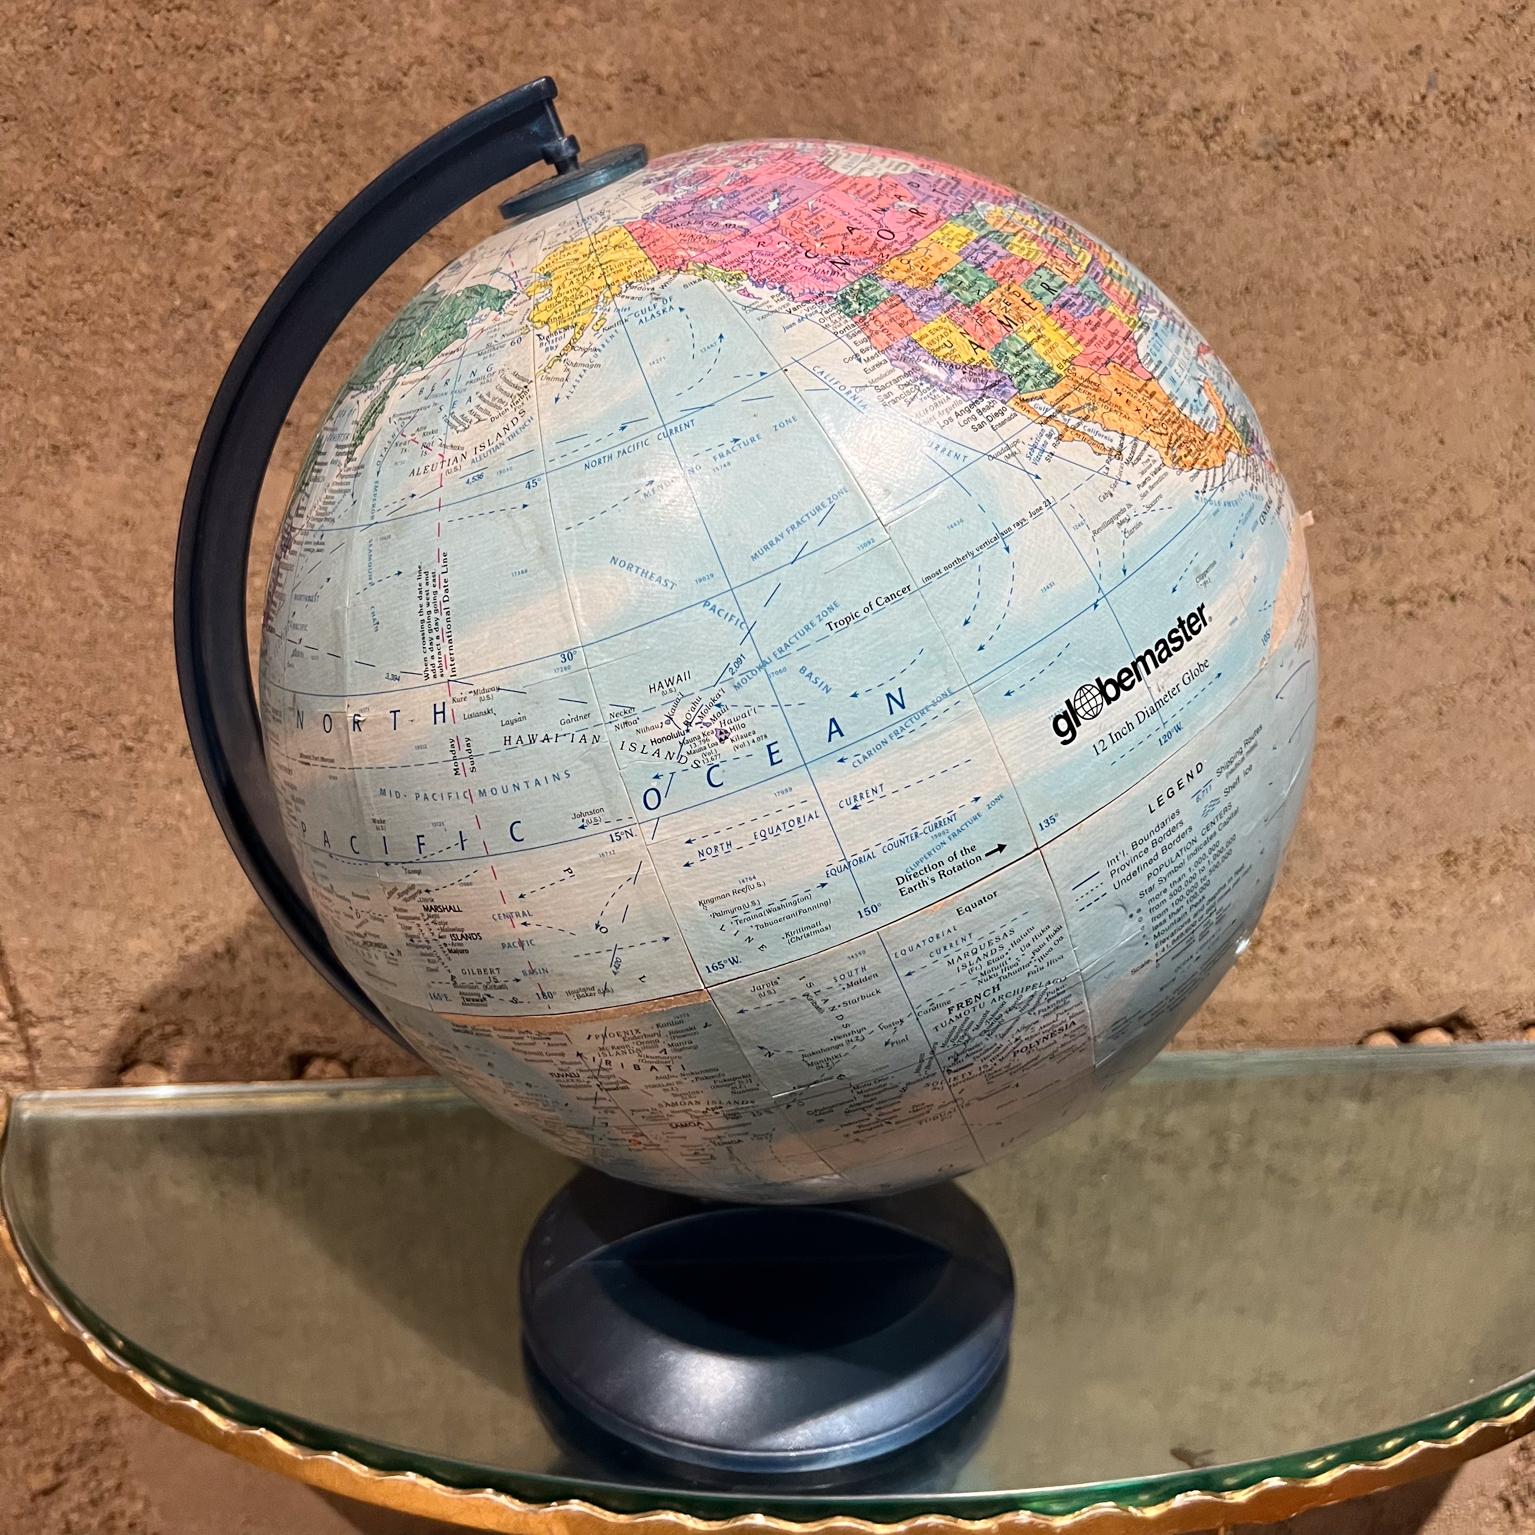 20th Century Vintage Globemaster World Globe
 15.5 h x 13 d x. 11.5 w
Paper Plastic
Some damage to paper.
Unrestored original vintage condition.
Refer to images
